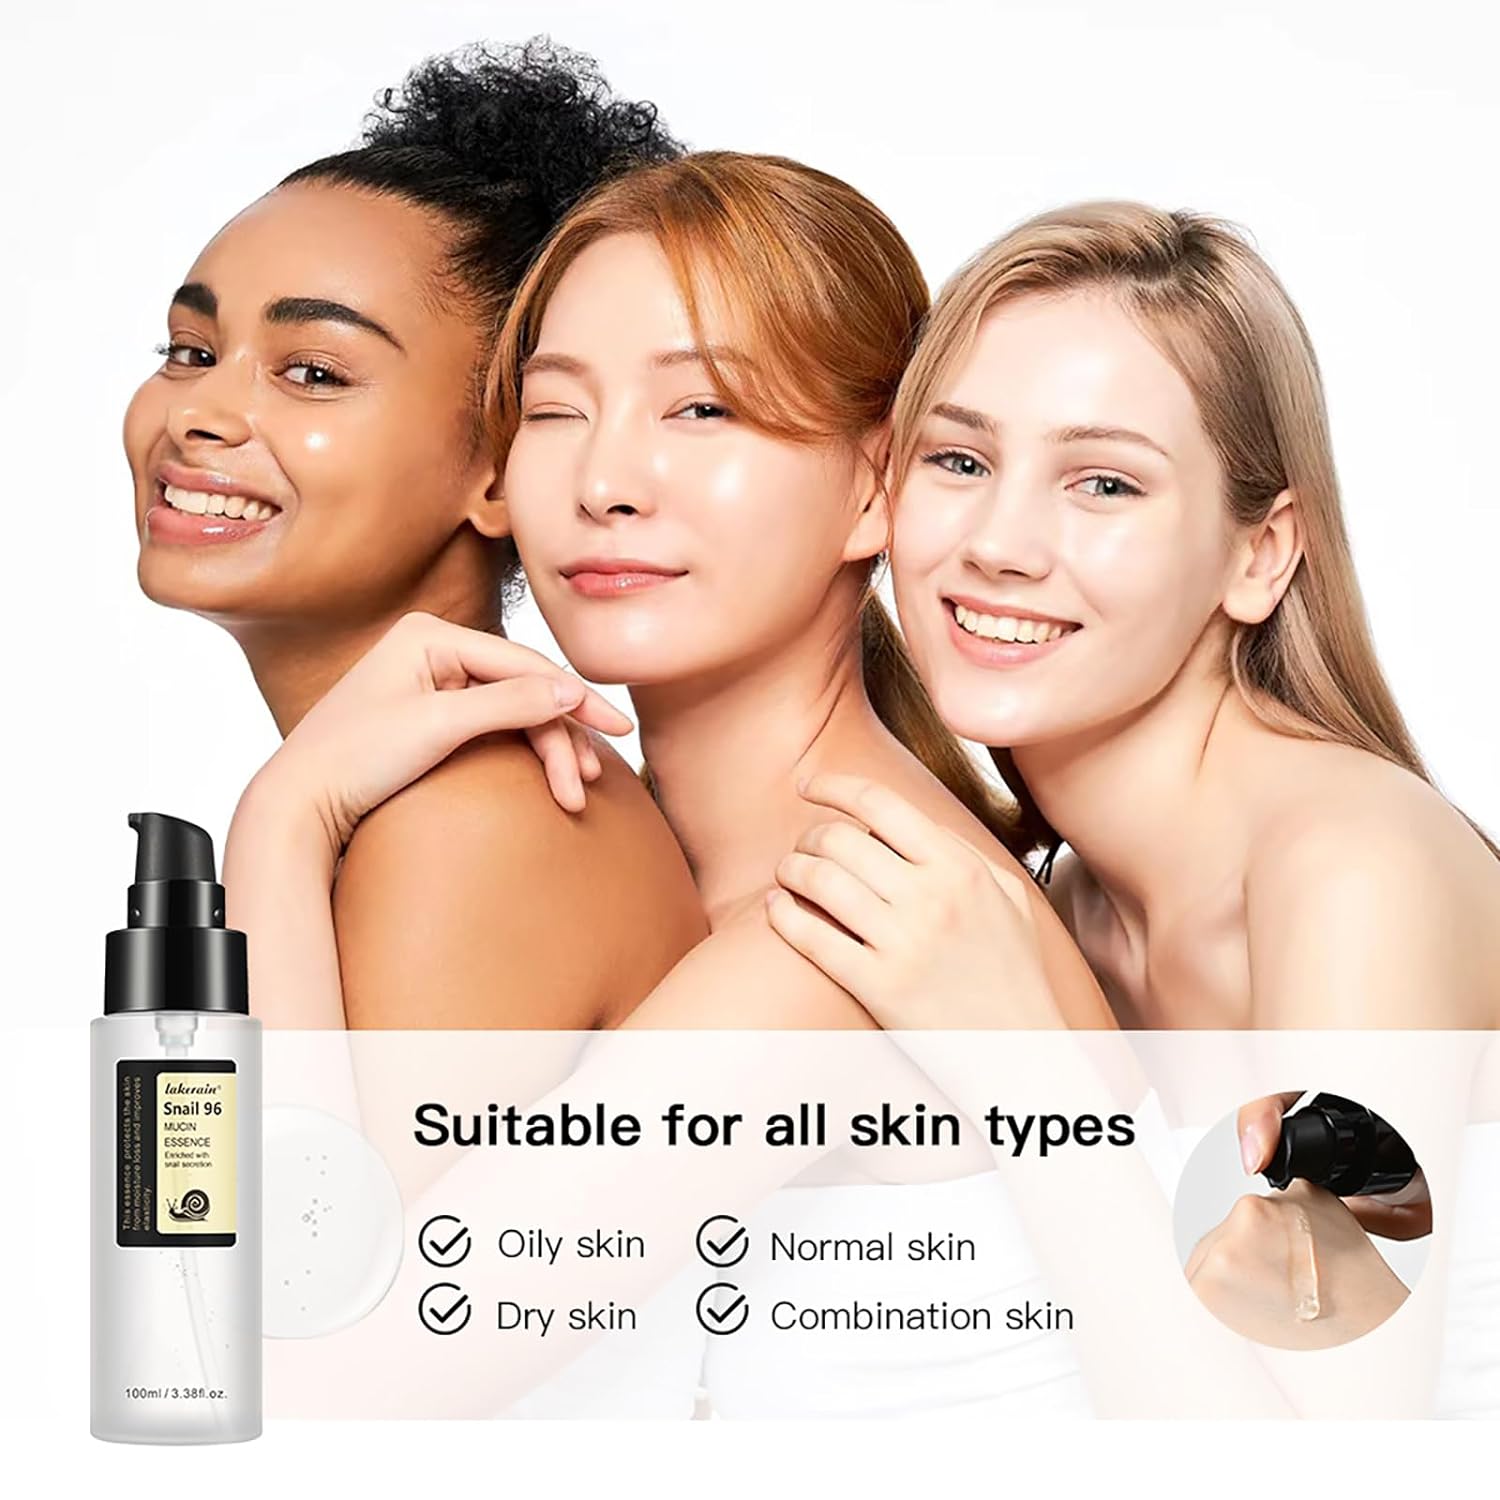 100ml Snail Mucin 96% Power Repairing Essence - Hydrating Serum for Face with Snail Secretion Filtrate for Dull Skin & Fine Lines - Suitable for All Skin Types